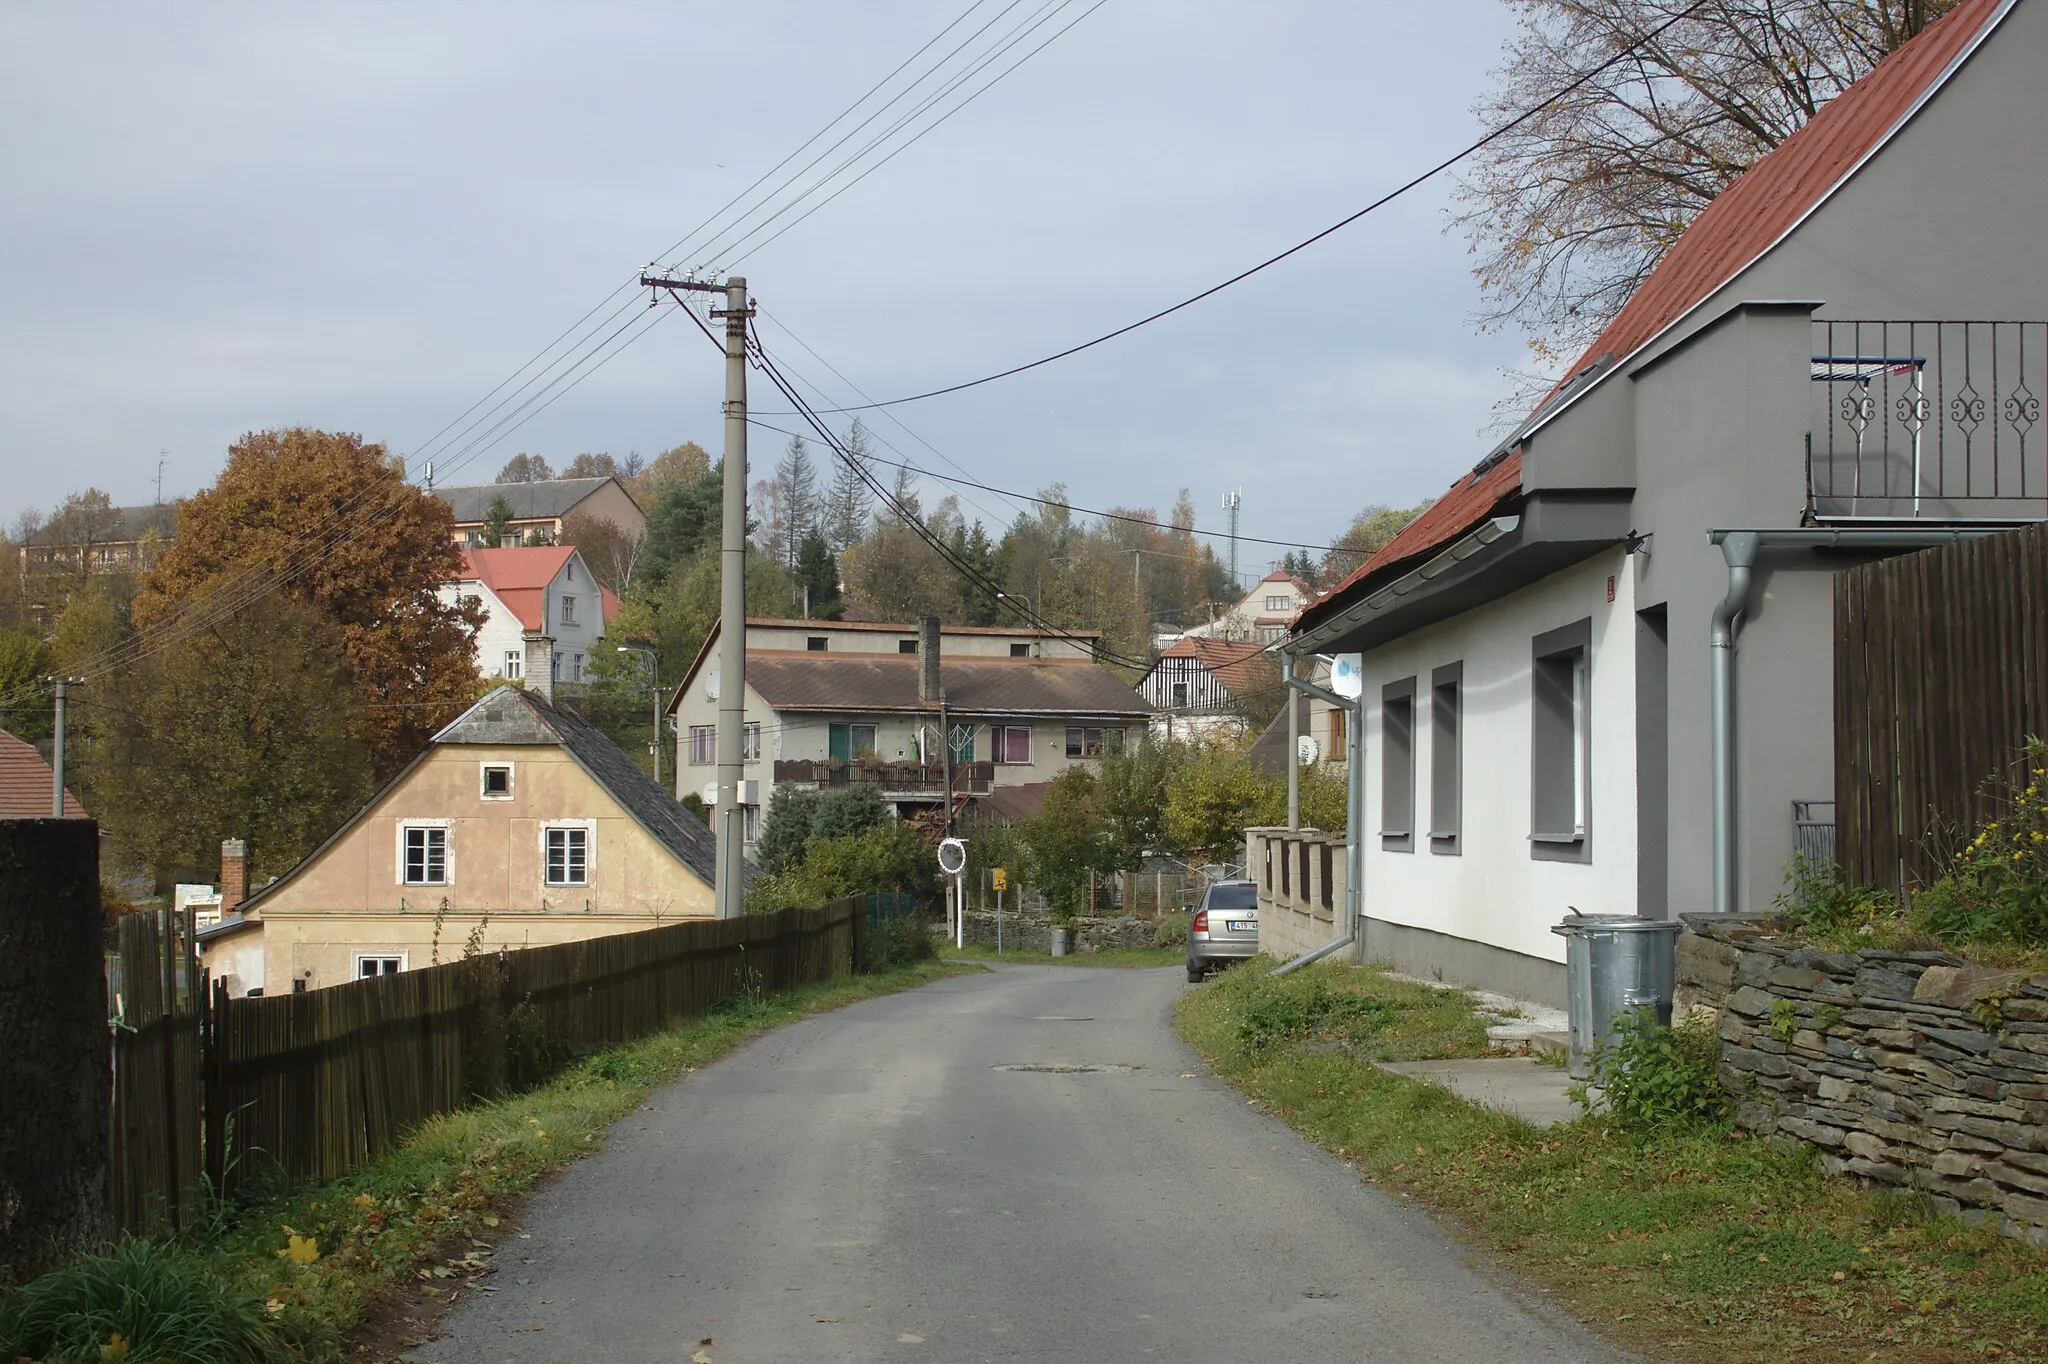 Photo showing: Buildings in the town of Dvorce, near the local church. Bruntál, CZ